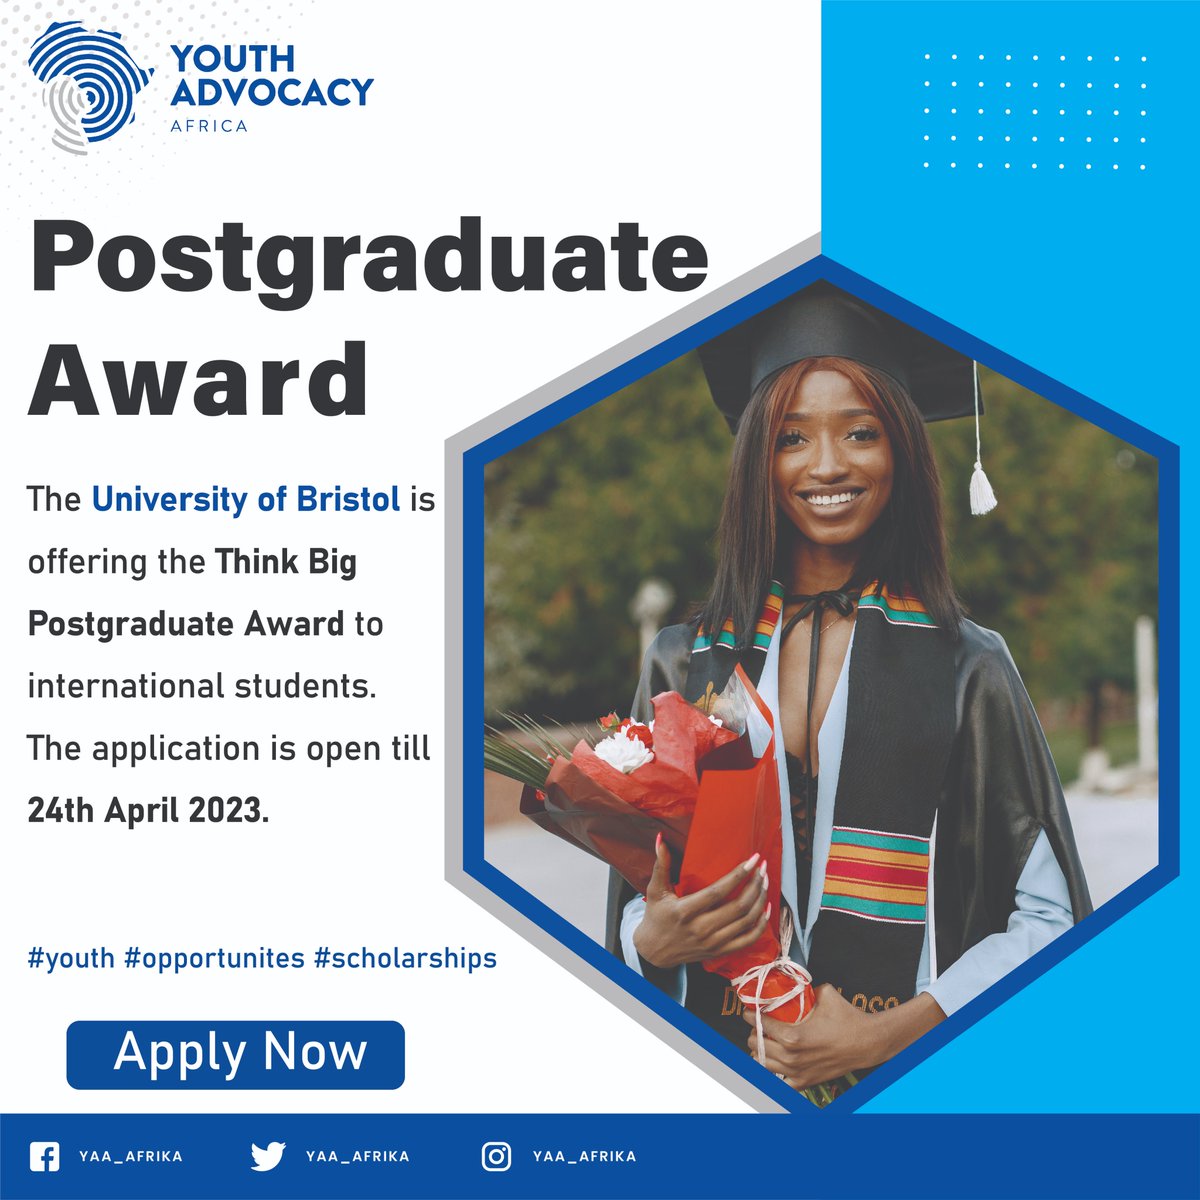 The University of Bristol is offering the Think Big Postgraduate Award to #internationalstudents. The application is open till 24th April 2023. Apply using the #internationalscholarships online application form Apply Here bristol.ac.uk/international/… #youthempowerment #opportunities